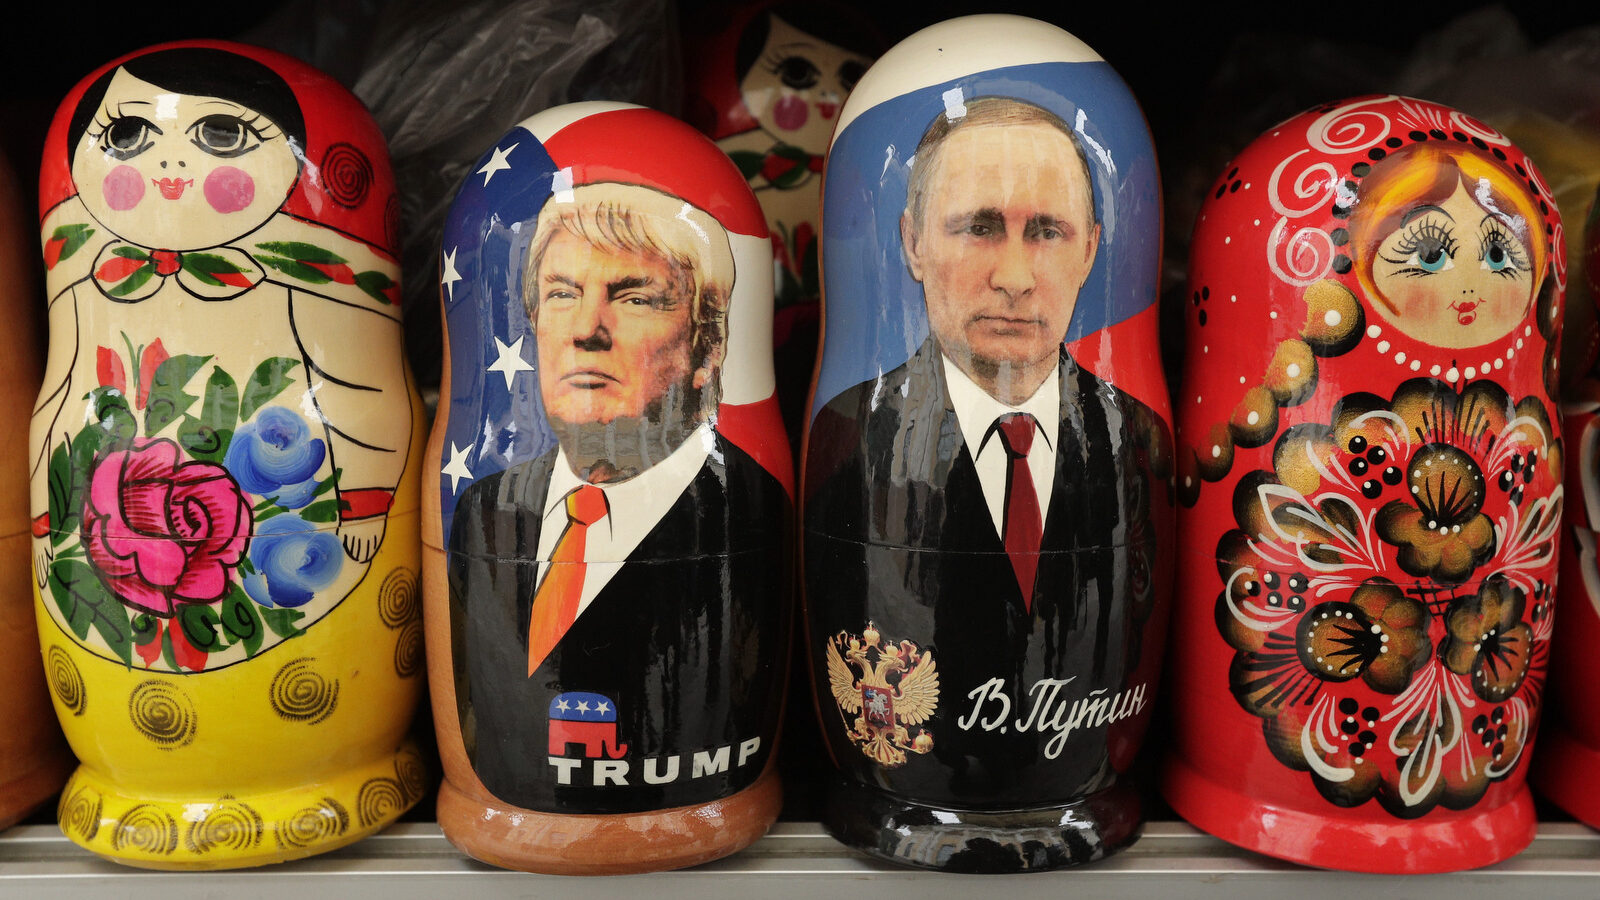 Traditional Russian wooden dolls called Matryoshka are displayed at a souvenir street shop in St.Petersburg, Russia.﻿ (AP/Dmitri Lovetsky)